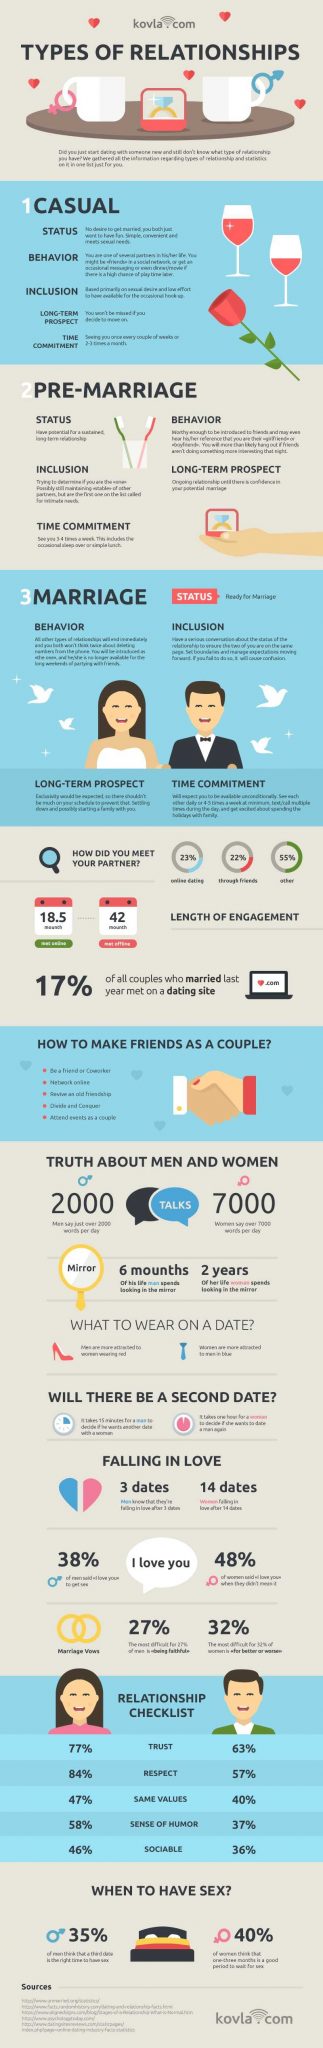 what is the most common relationship type